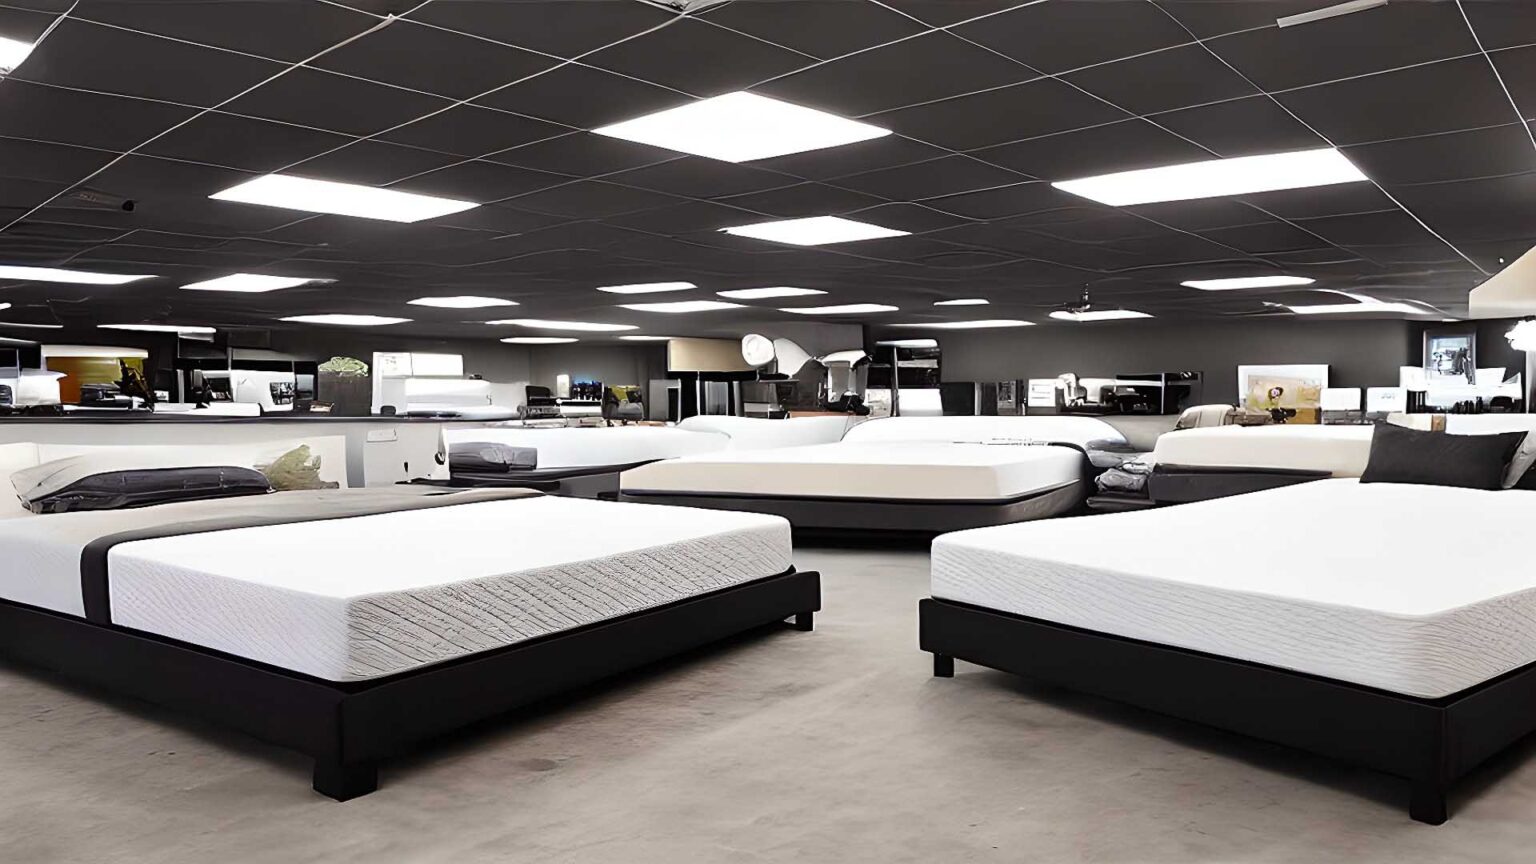 Mattress Stores, mattress dealers, and mattress retailers near me in Silver Spring, MD